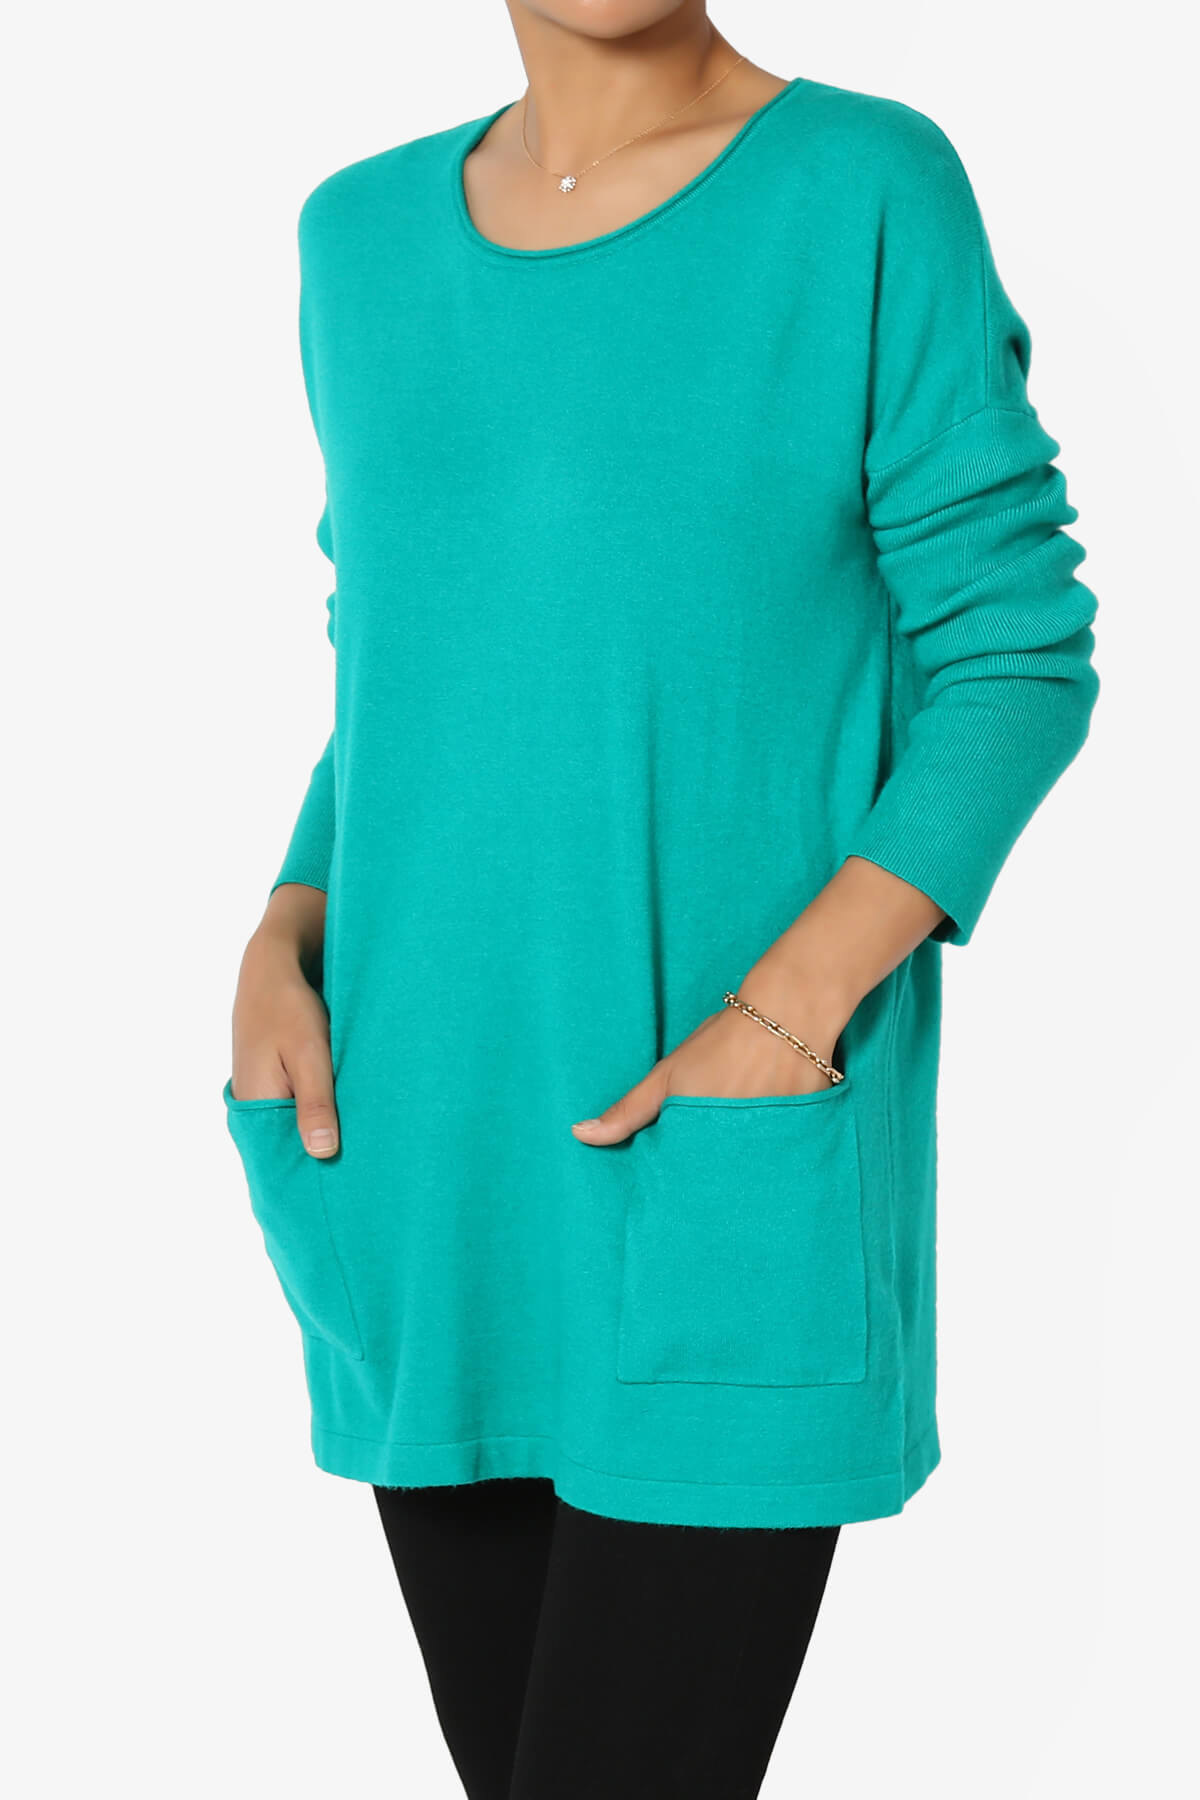 Brecken Pocket Long Sleeve Soft Knit Sweater Tunic TURQUOISE_3